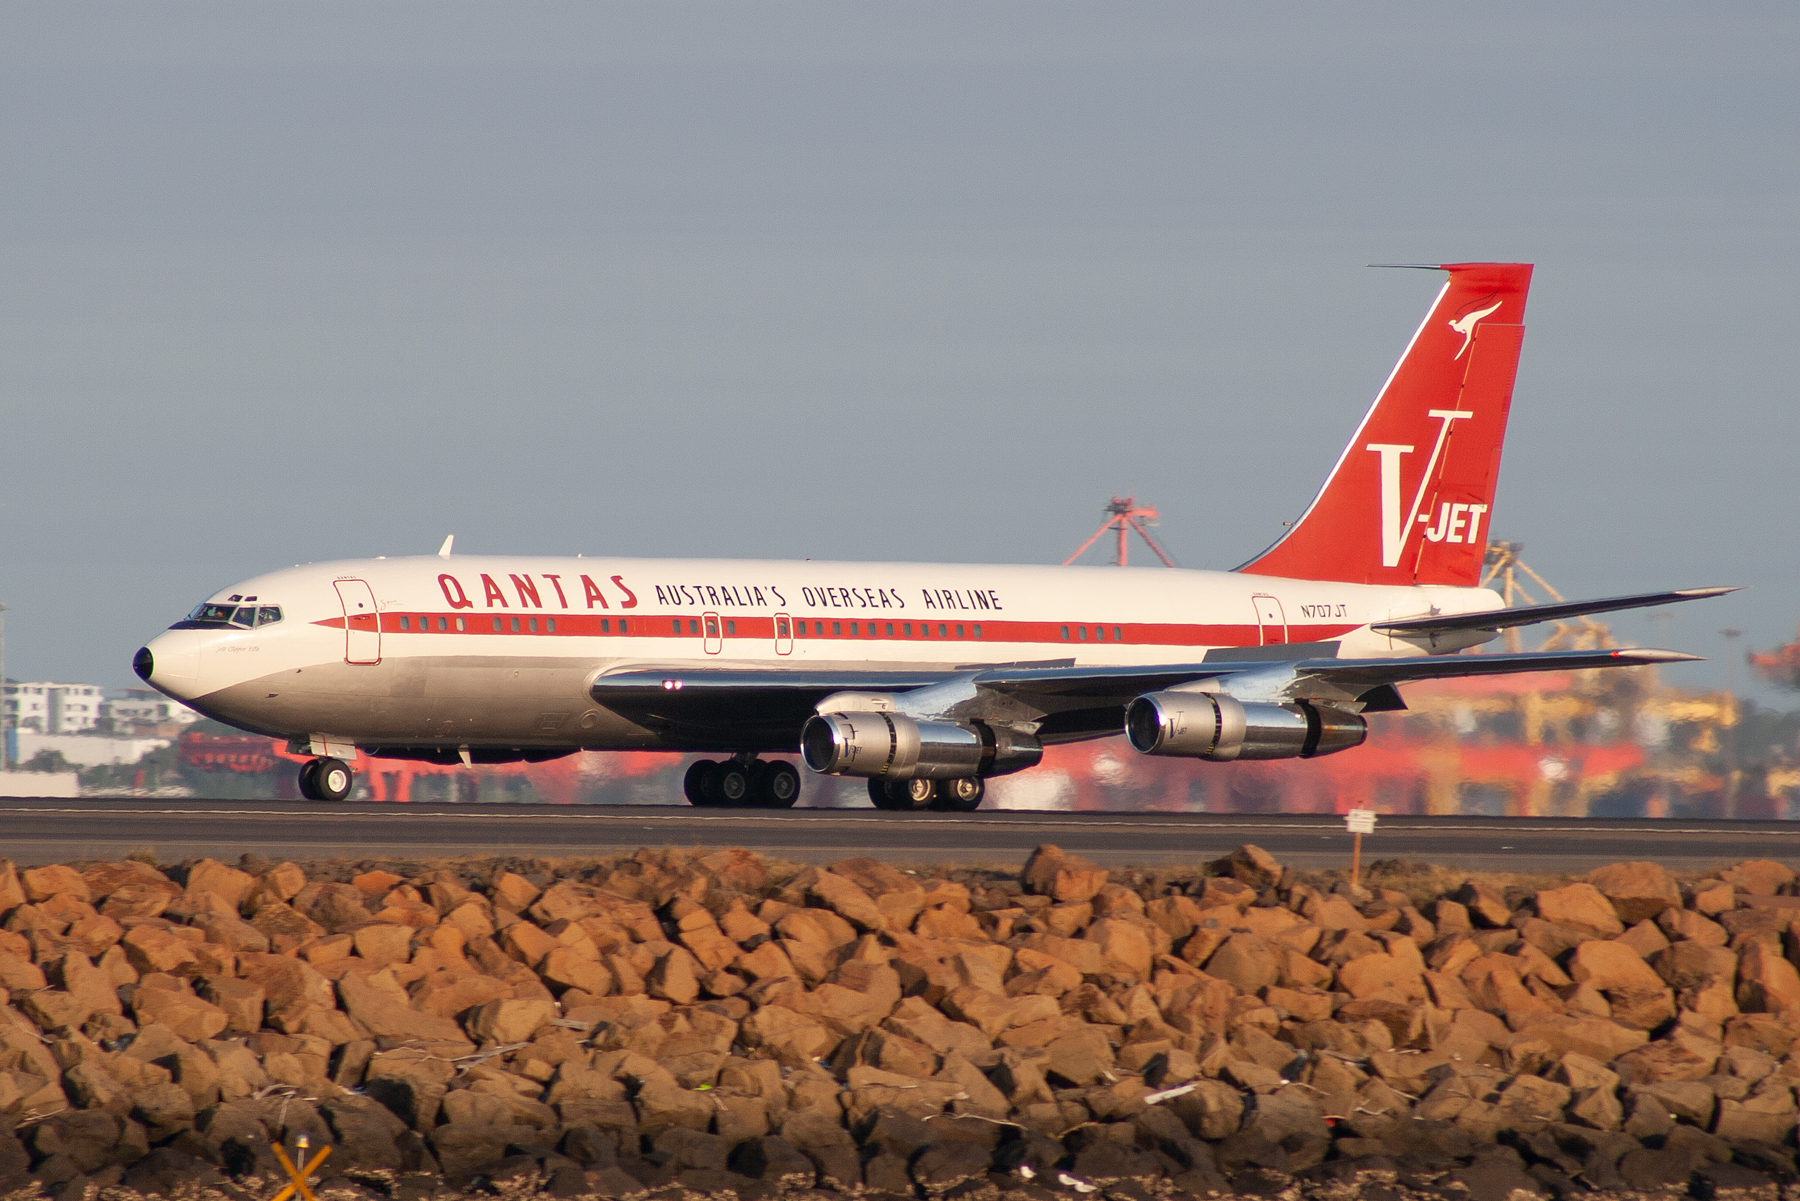 Jet Clipper Johnny Boeing 707-100B N707JT at Kingsford Smith